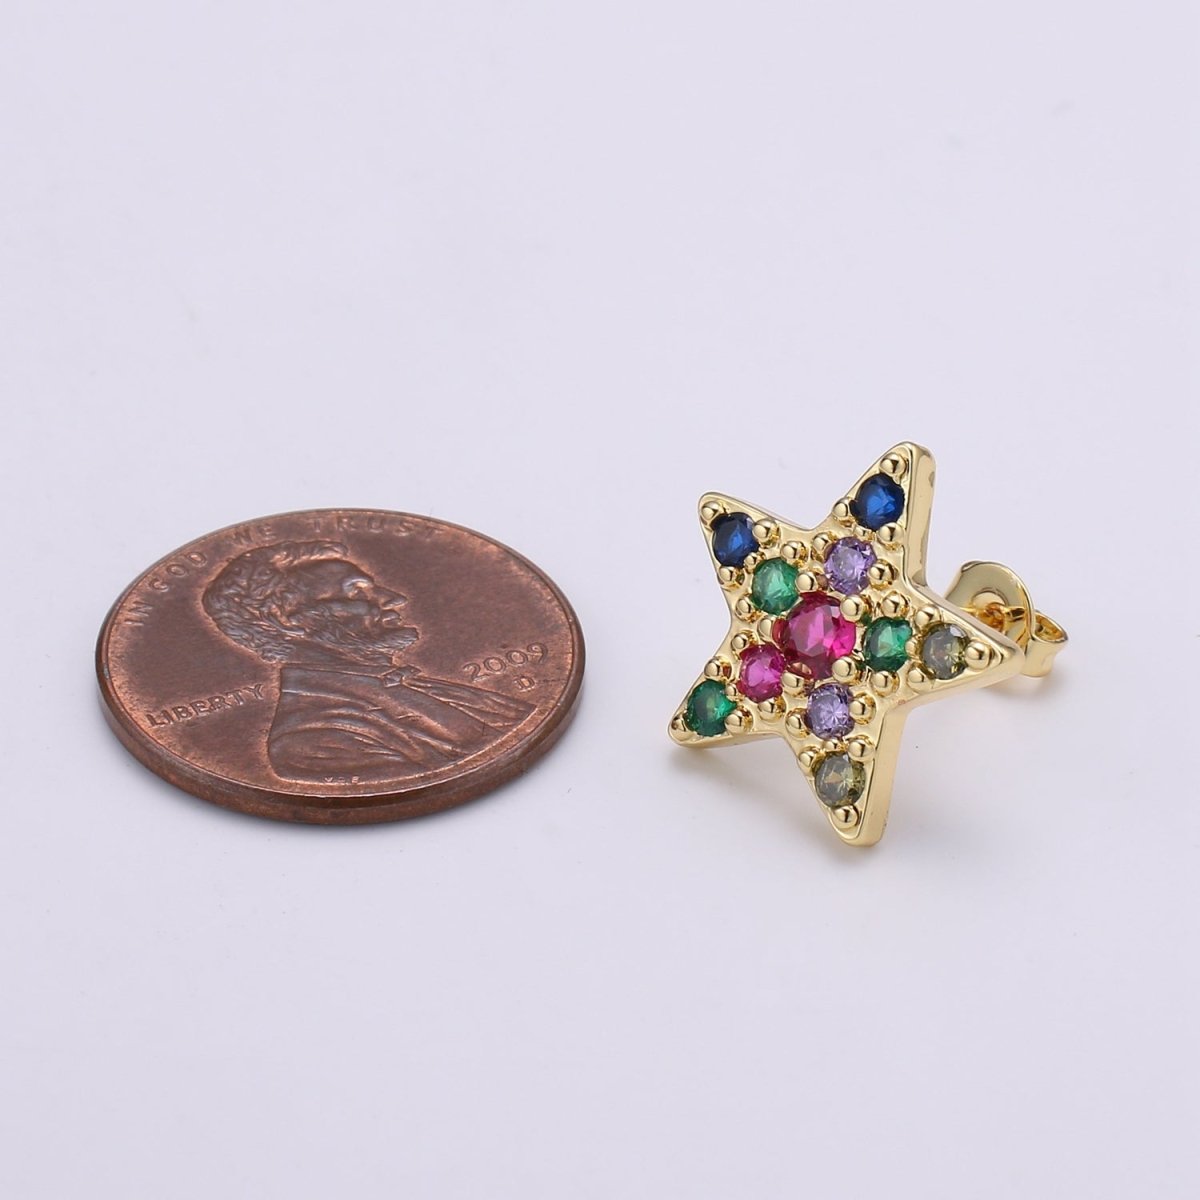 Star Design 24K Gold Plated Pave Cz Stud Earring,Match with charm CHGF-2050 for DIY Bracelet Craft Supply Jewelry Making Q-405 - DLUXCA